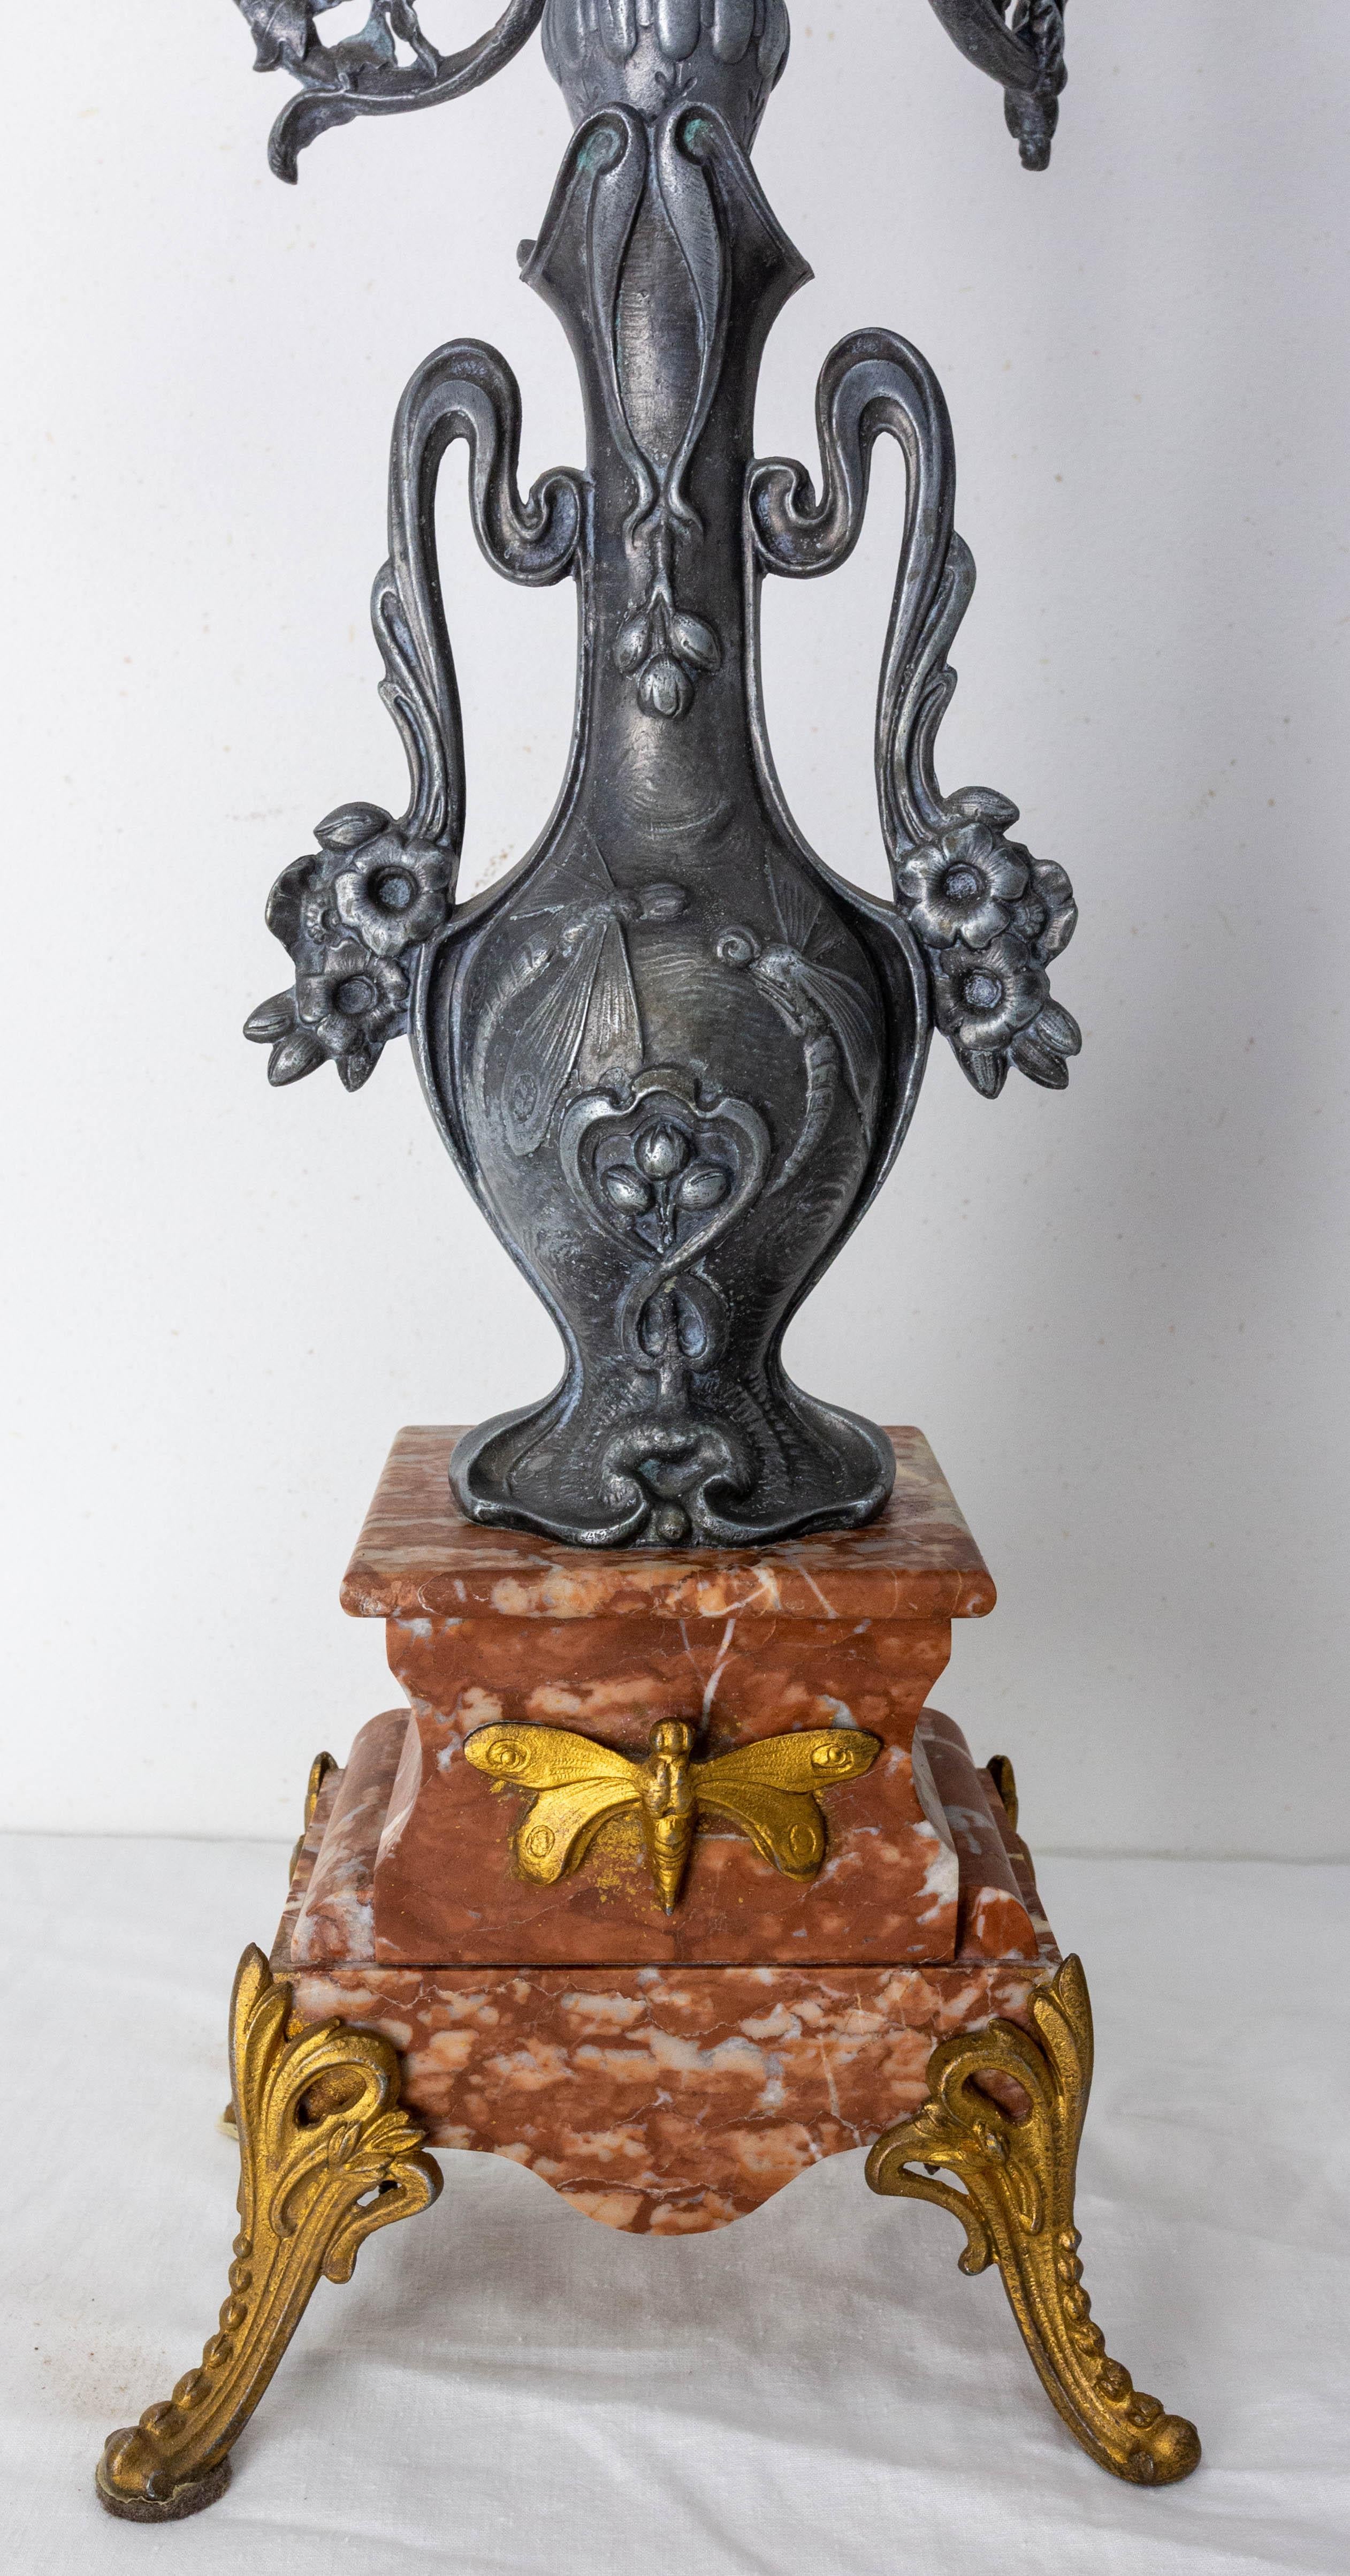 Pair of French Art Nouveau Candelabras  Marble Zamac Candleholder, Early 20th C. For Sale 1